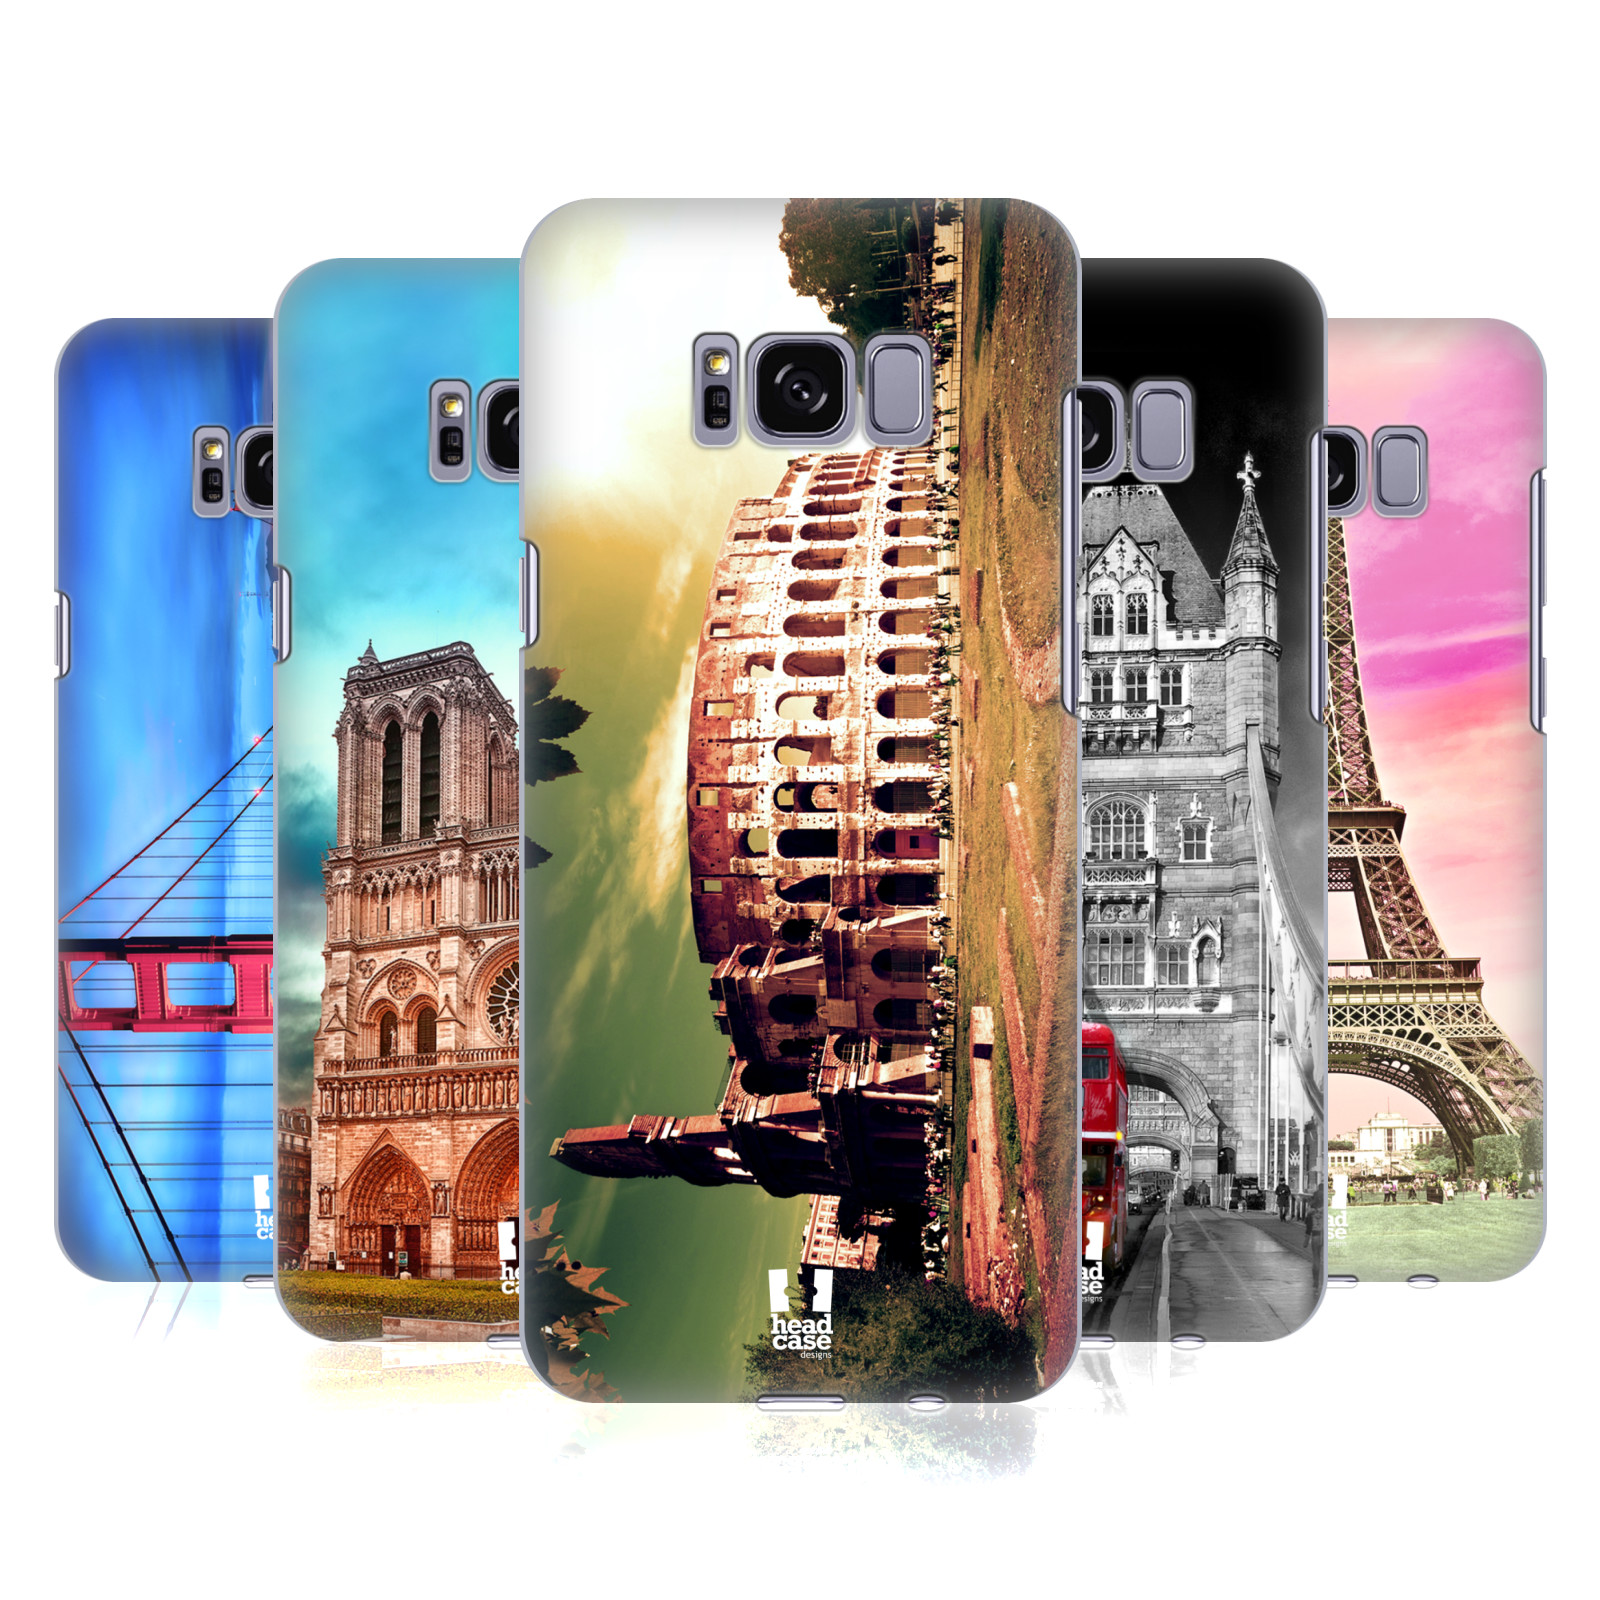 HEAD CASE DESIGNS BEST OF PLACES SET 3 HARD BACK CASE FOR SAMSUNG GALAXY S8